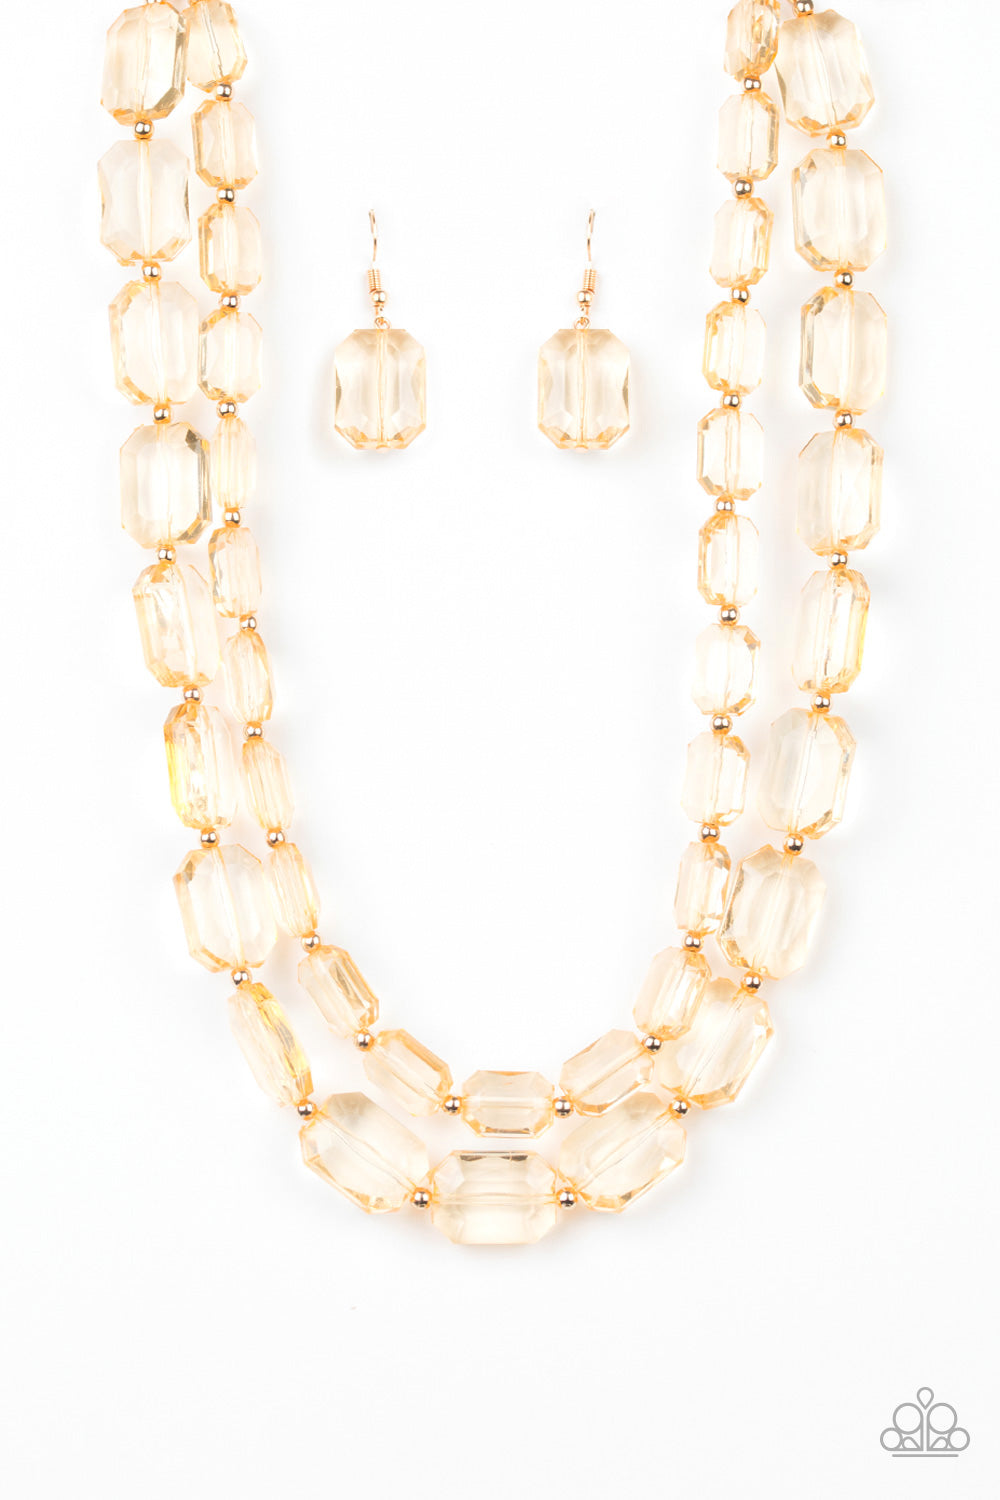 Ice Bank Gold Paparazzi Necklace Cashmere Pink Jewels - Cashmere Pink Jewels & Accessories, Cashmere Pink Jewels & Accessories - Paparazzi